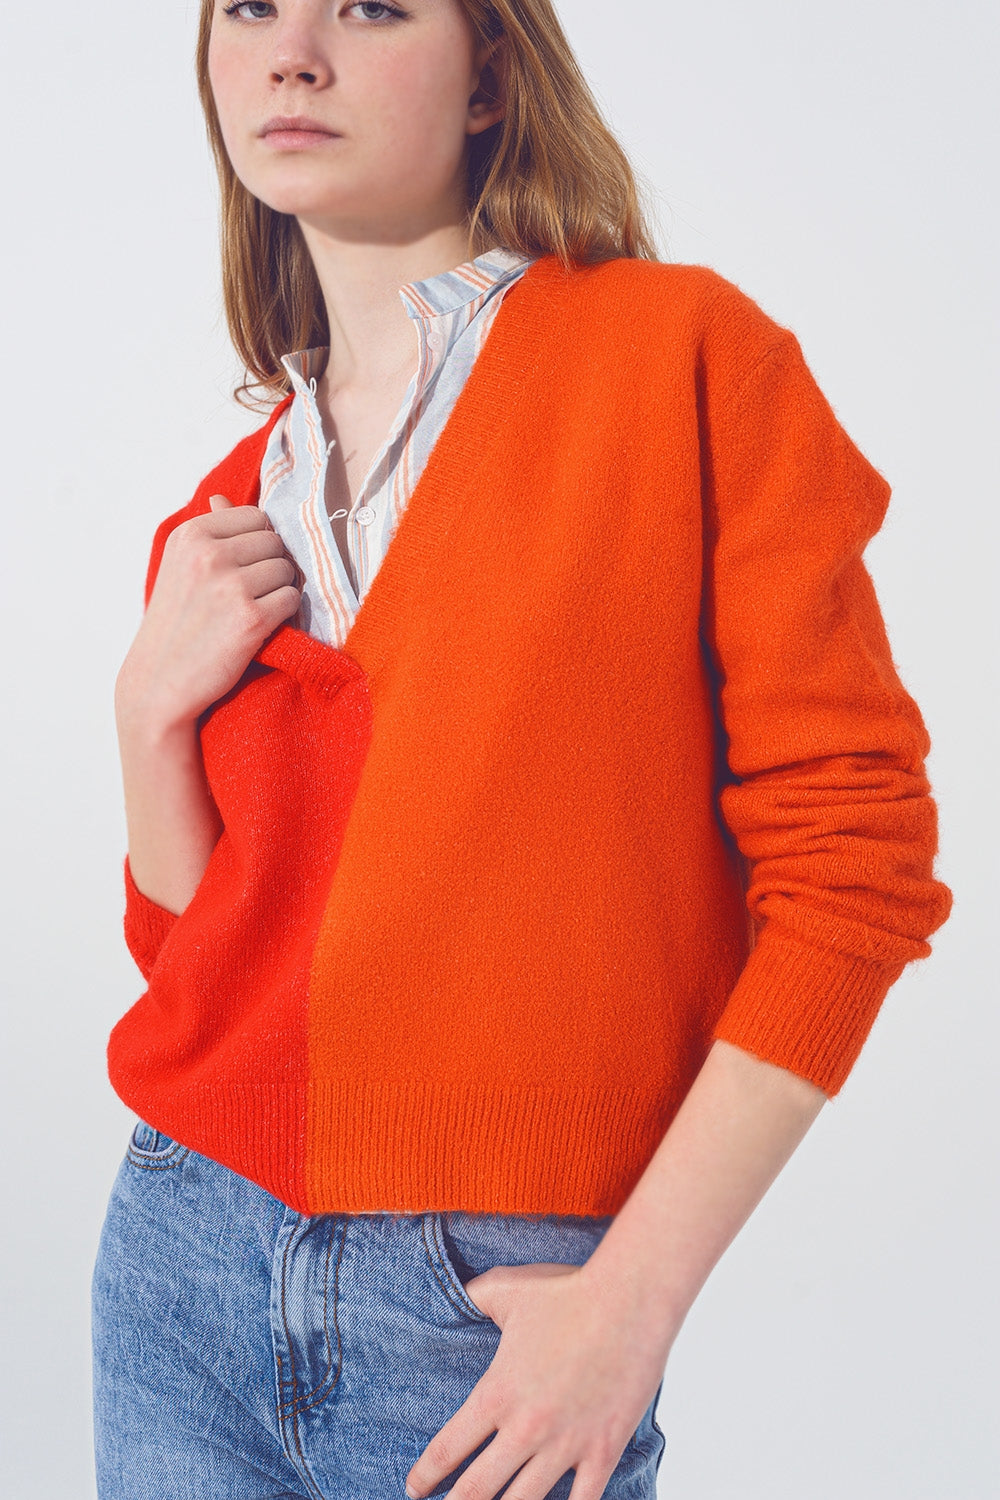 Q2 V Neck Colorblock Sweater in Red and Orange